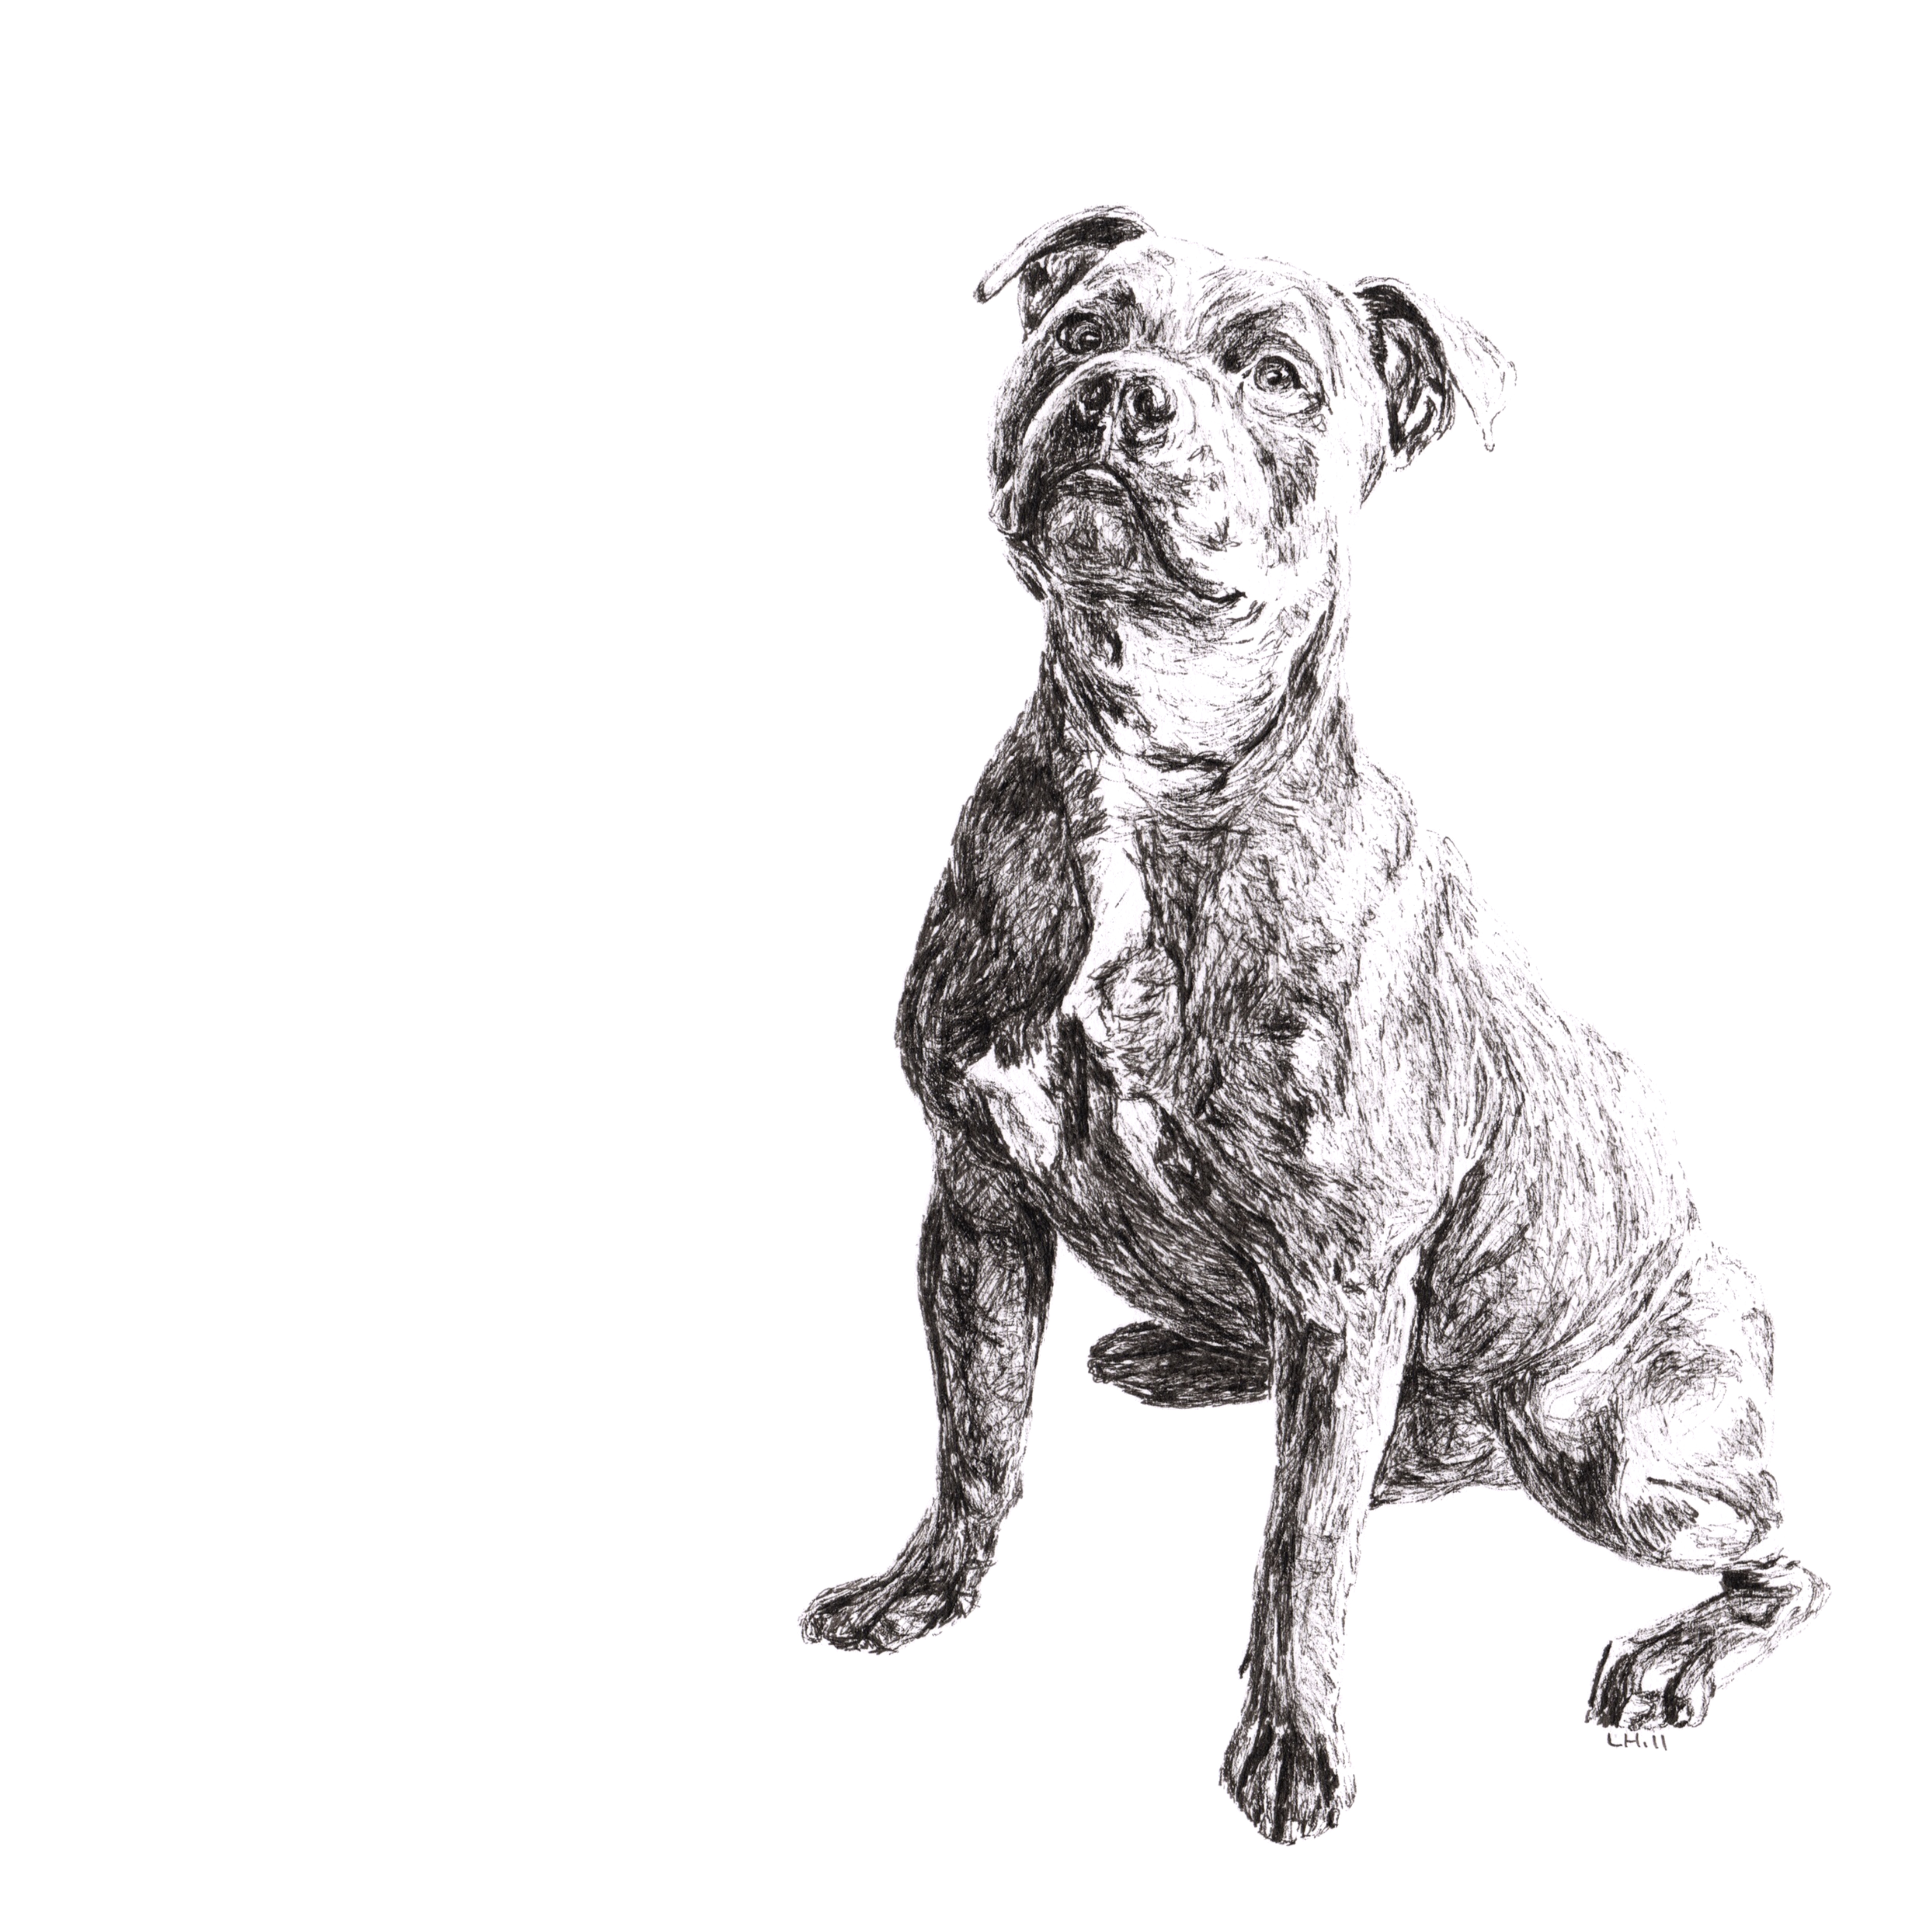 Staffordshire Bull Terrier pen and ink illustration by Louisa Hill